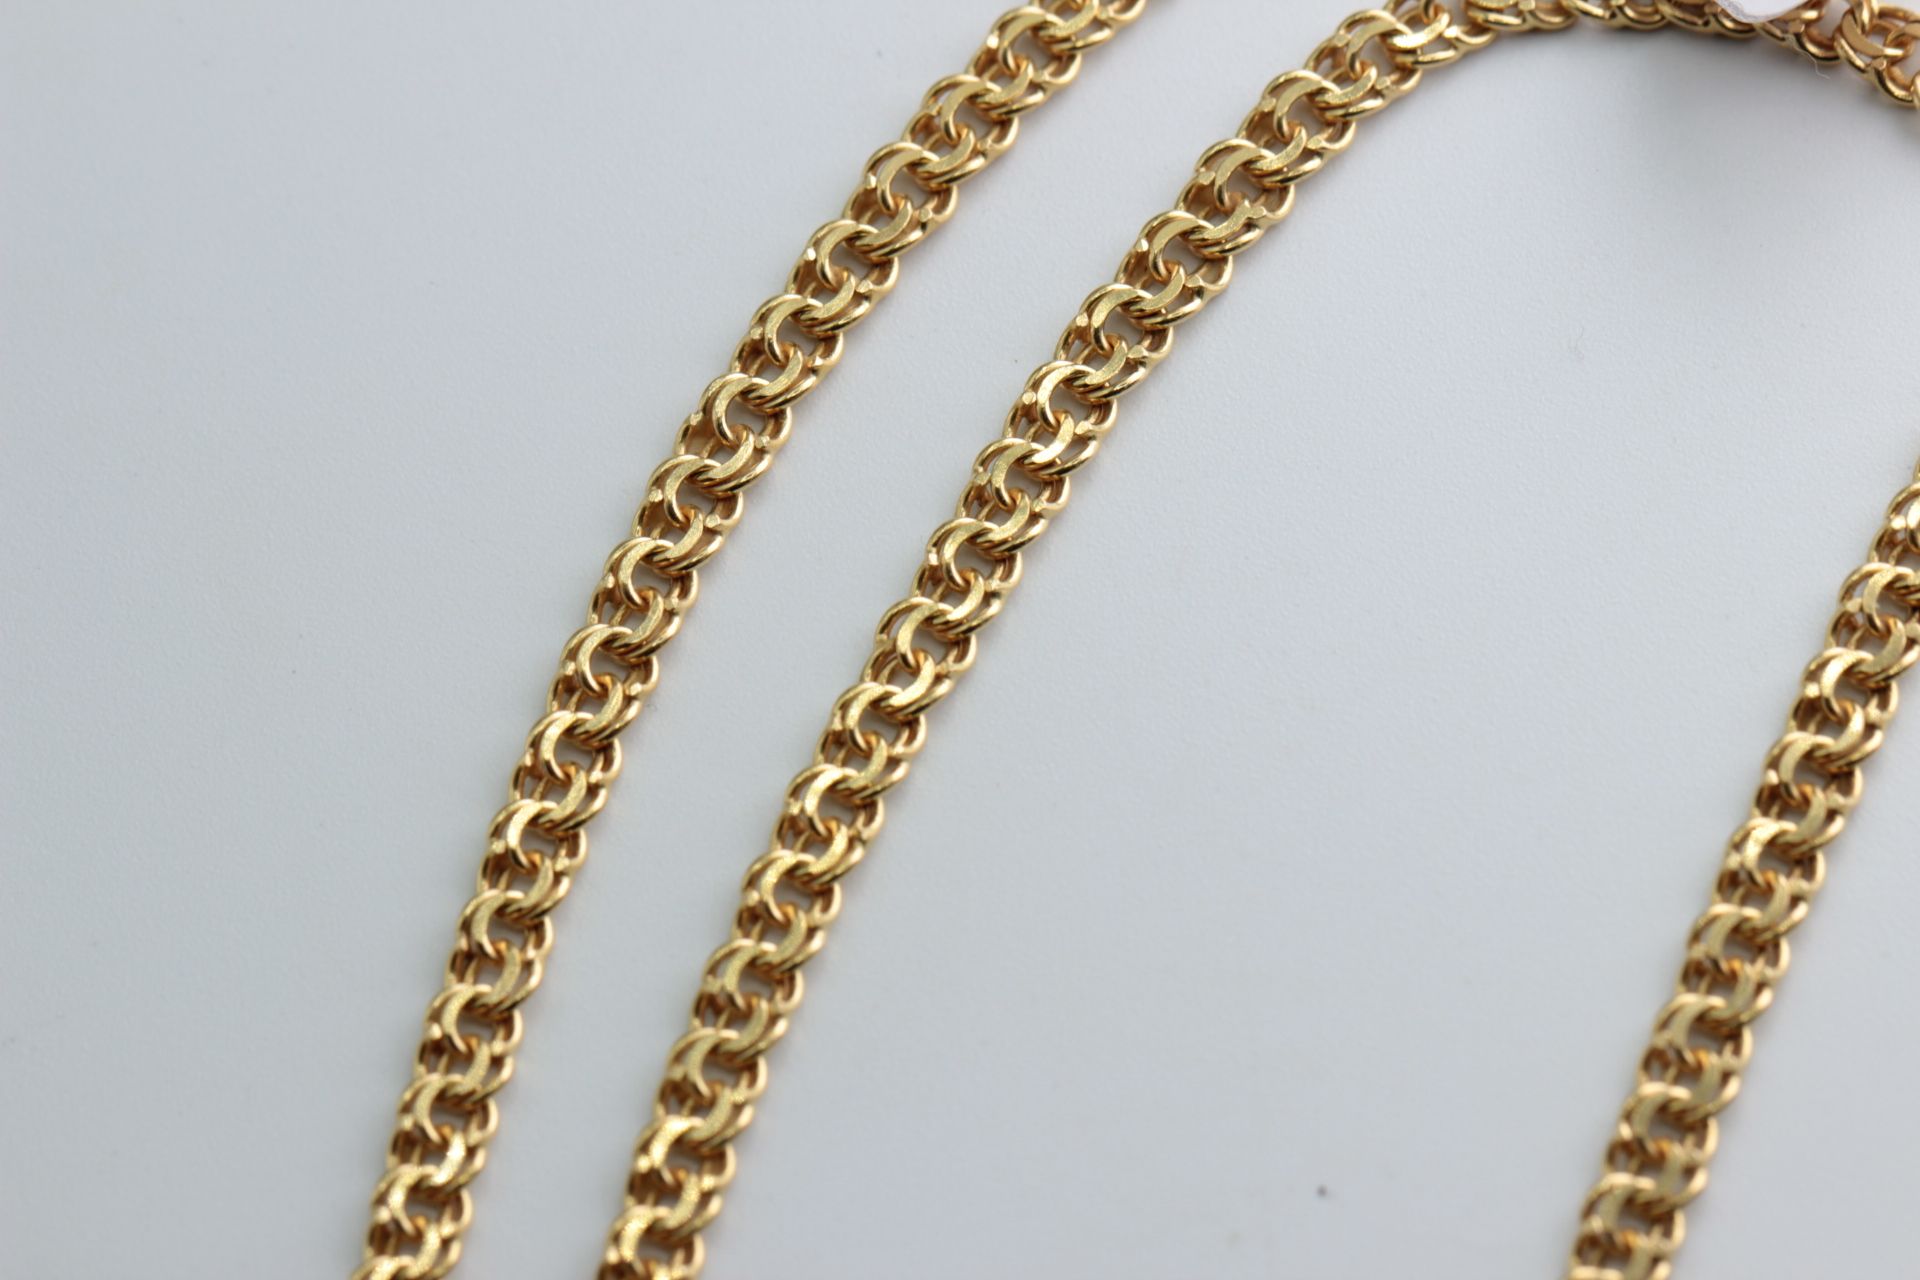 Heavy Cartier Necklace 18K Yellow Gold - Image 2 of 4